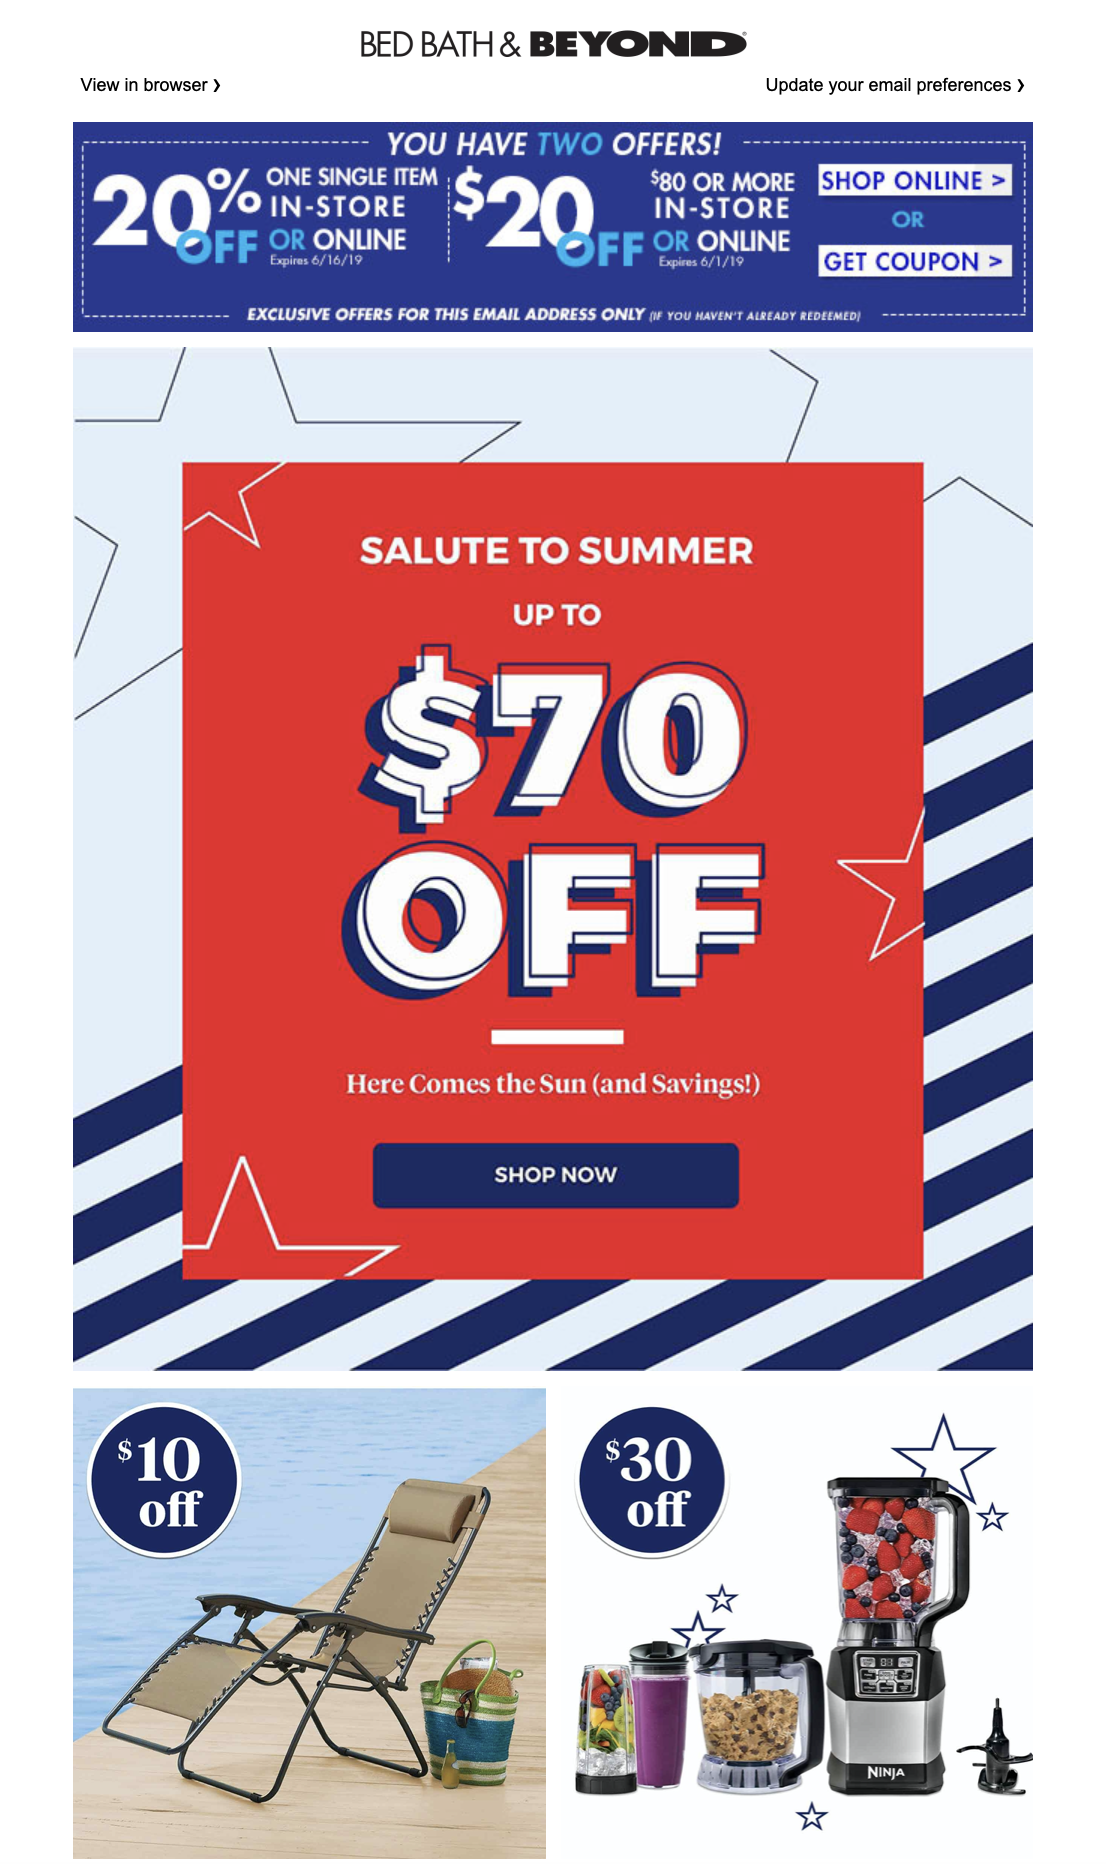 Memorial Day email campaign by Bed, Bath & Beyond